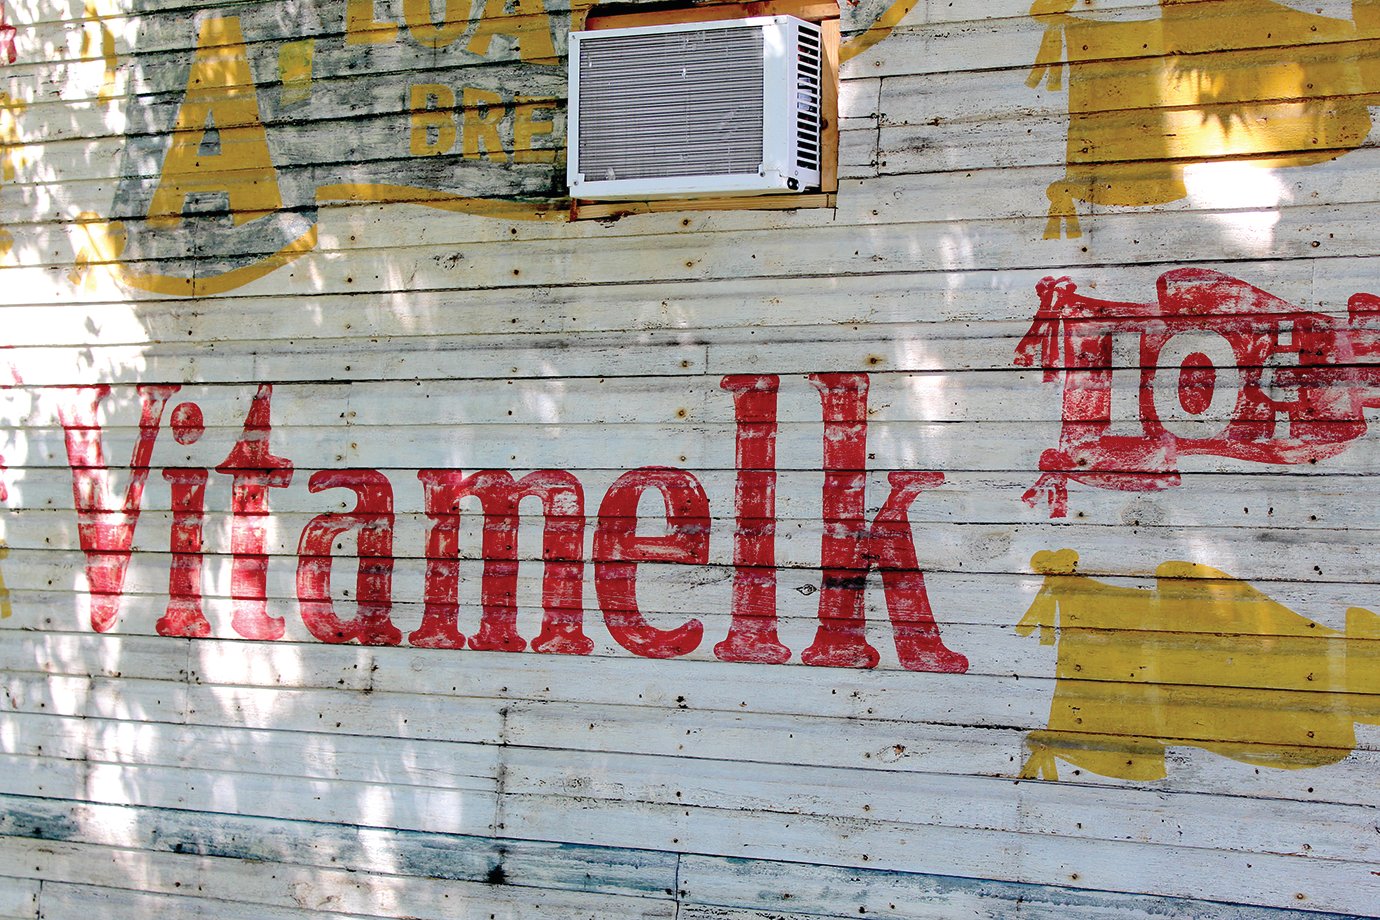 Vitamelk, an early 20th Century mulit-vitamin fortifier for feeds, again adorns the outside of a historic building at 1101 E. Main St. following decades behind particulate siding.